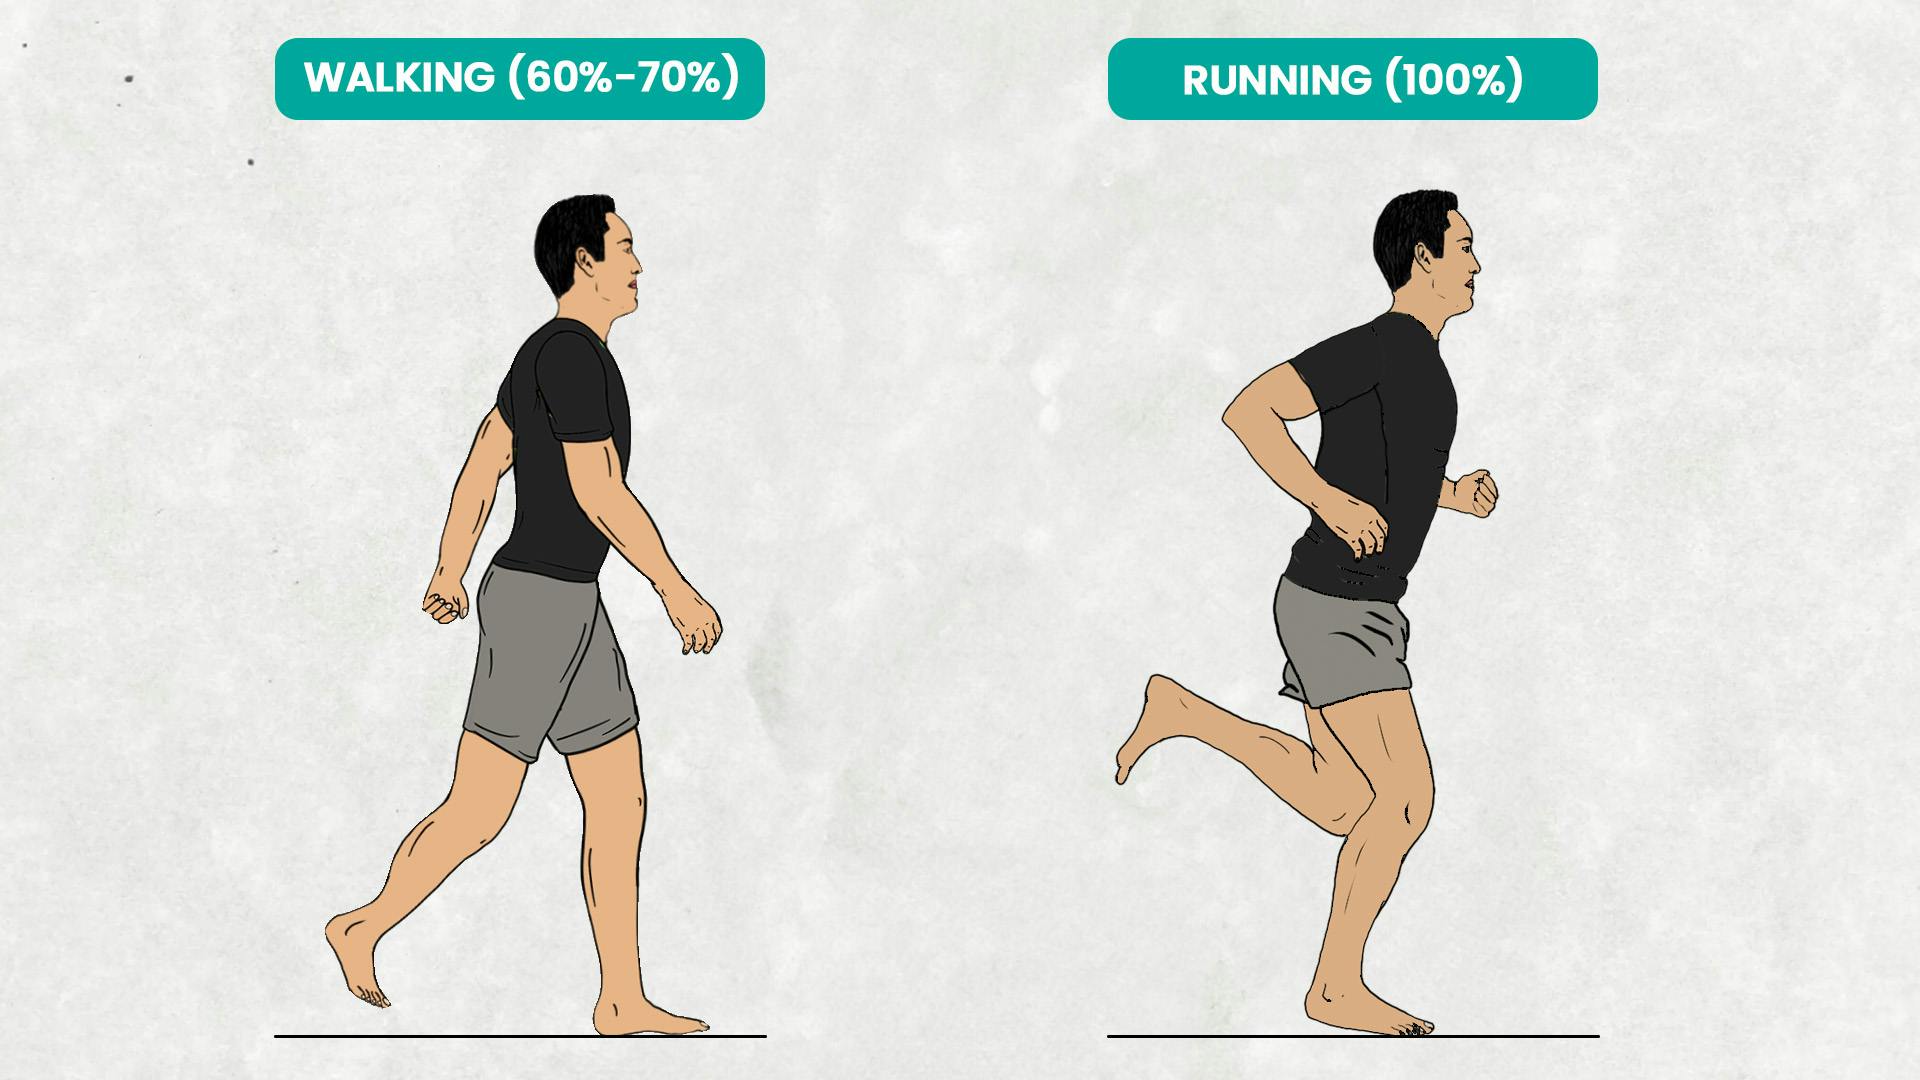 Single Leg Stance Time While Walking and Running